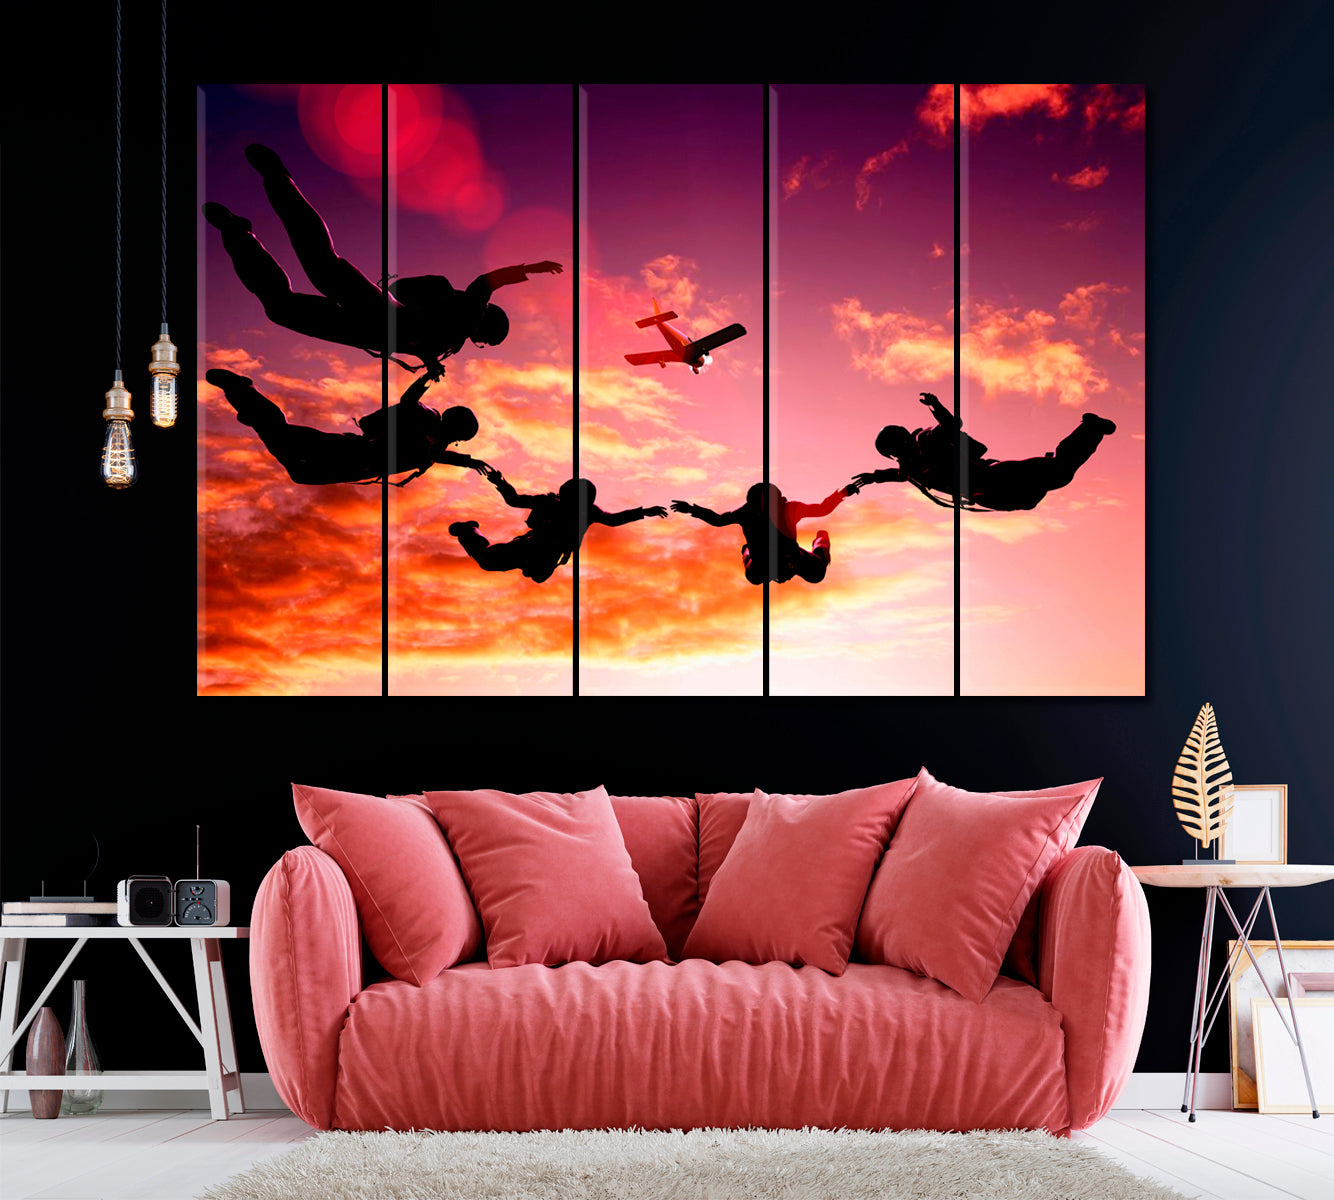 Skydivers in Sky Canvas Print ArtLexy 5 Panels 36"x24" inches 